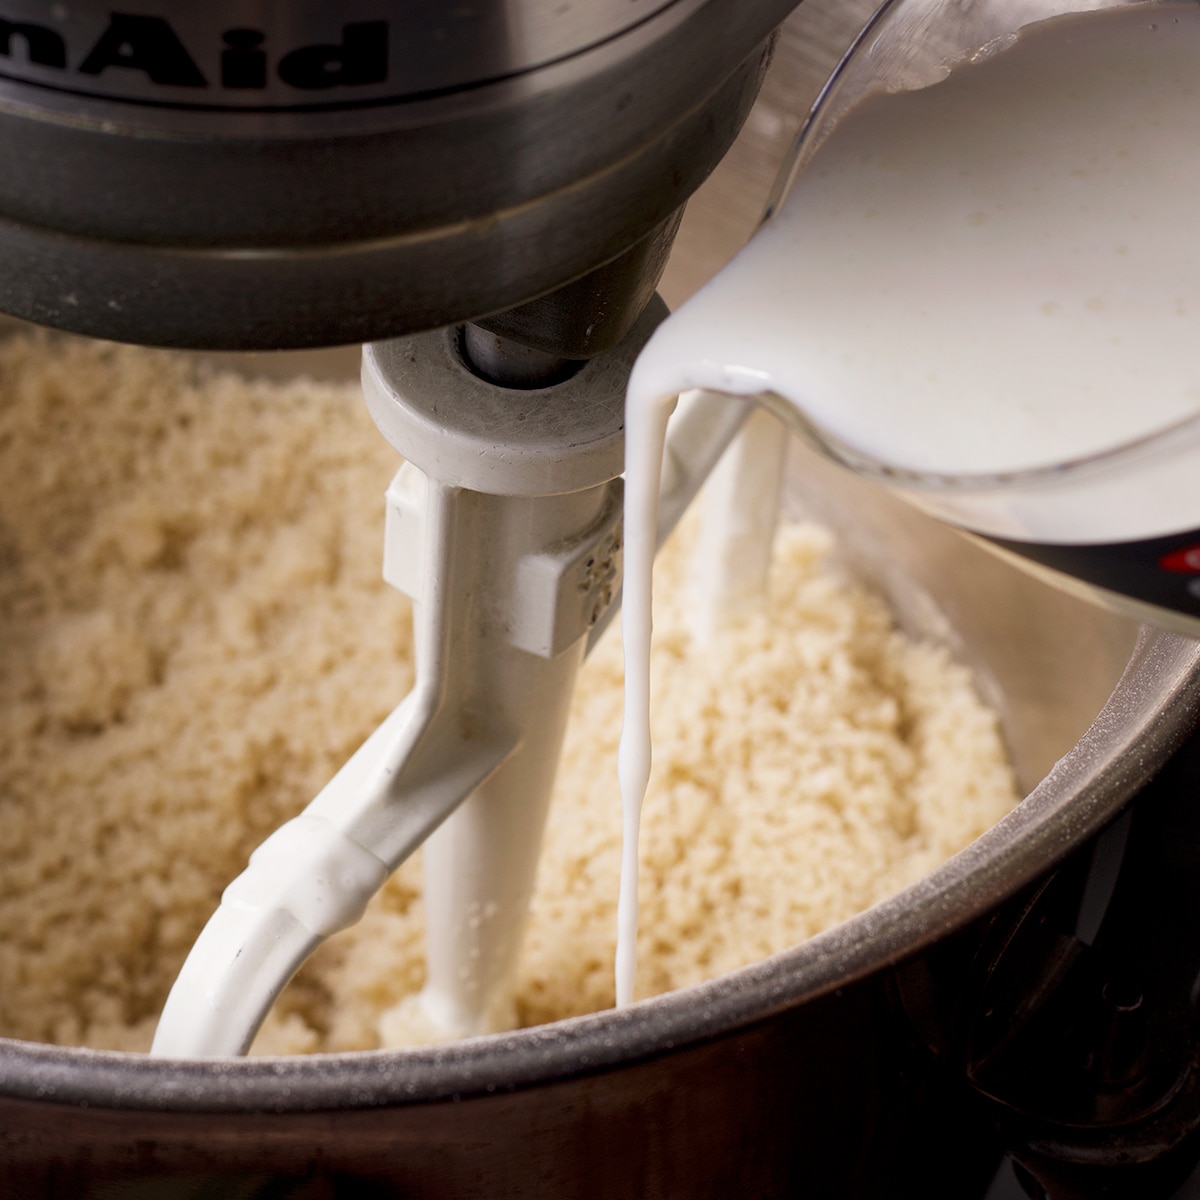 Pouring buttermilk into cake batter while an electric mixer is beating the batter.